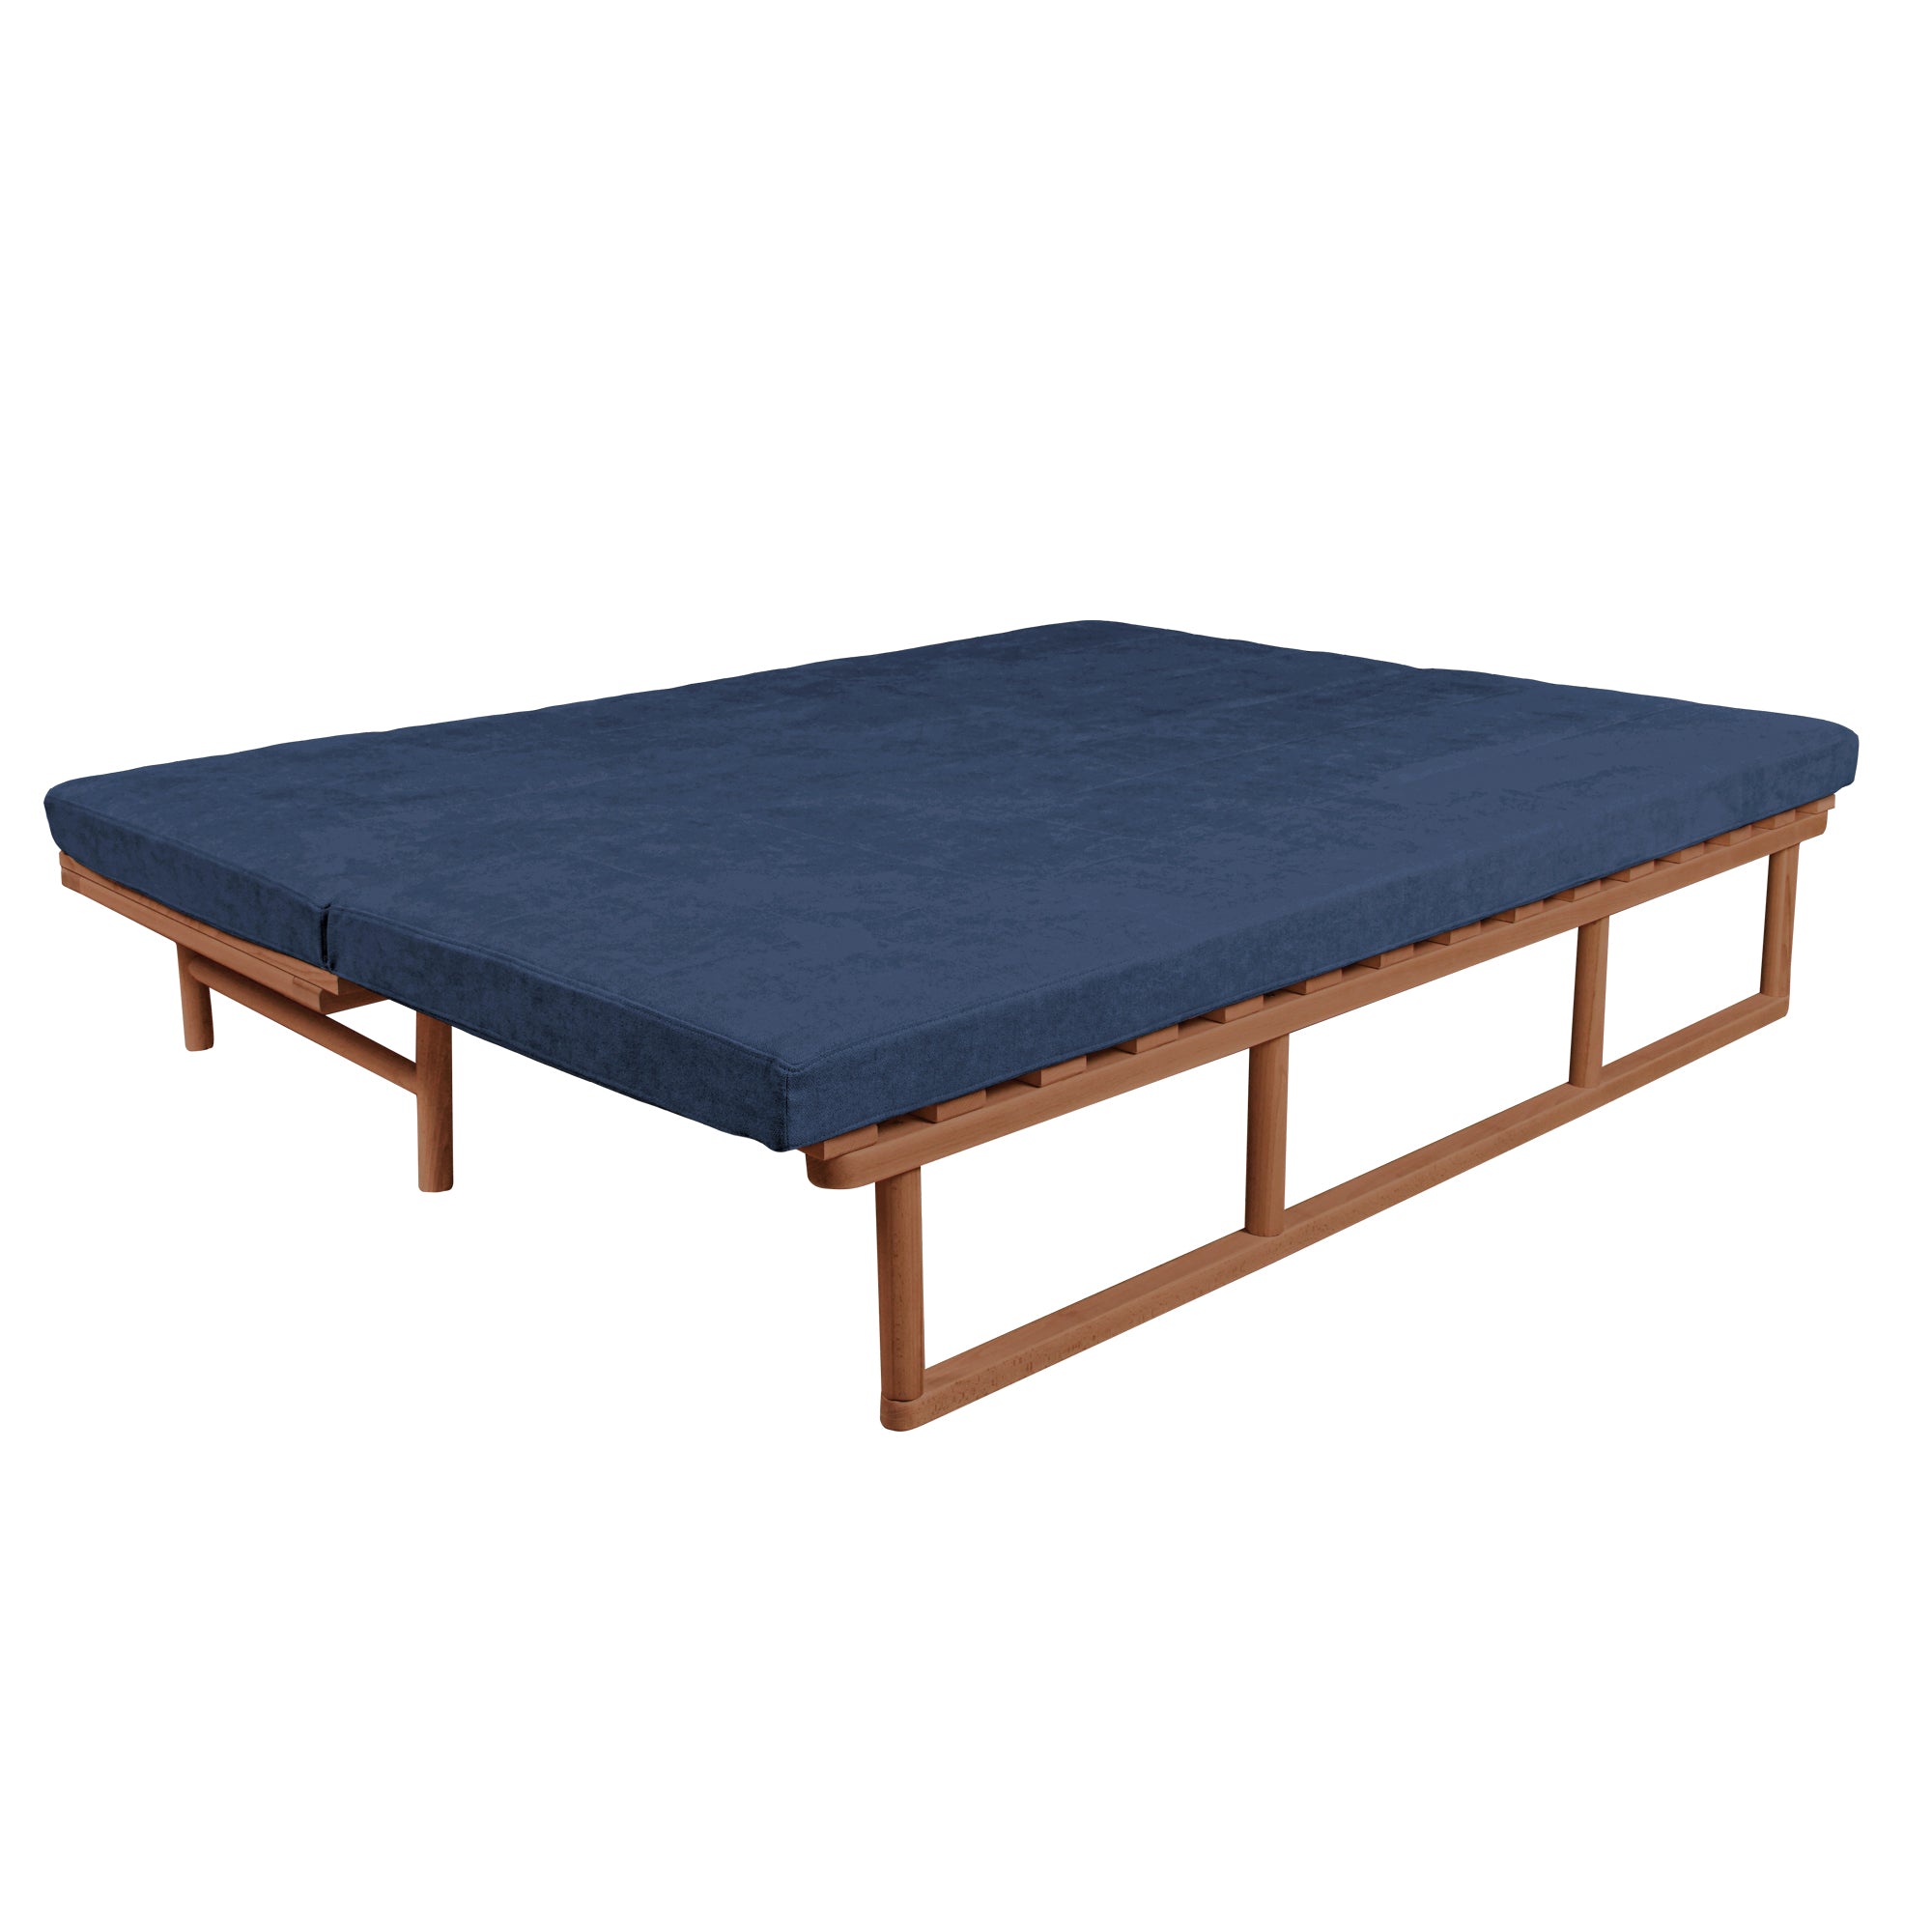 Le MAR Folding Daybed, Beech Wood Frame, Caramel Colour-blue upholstery-folded view